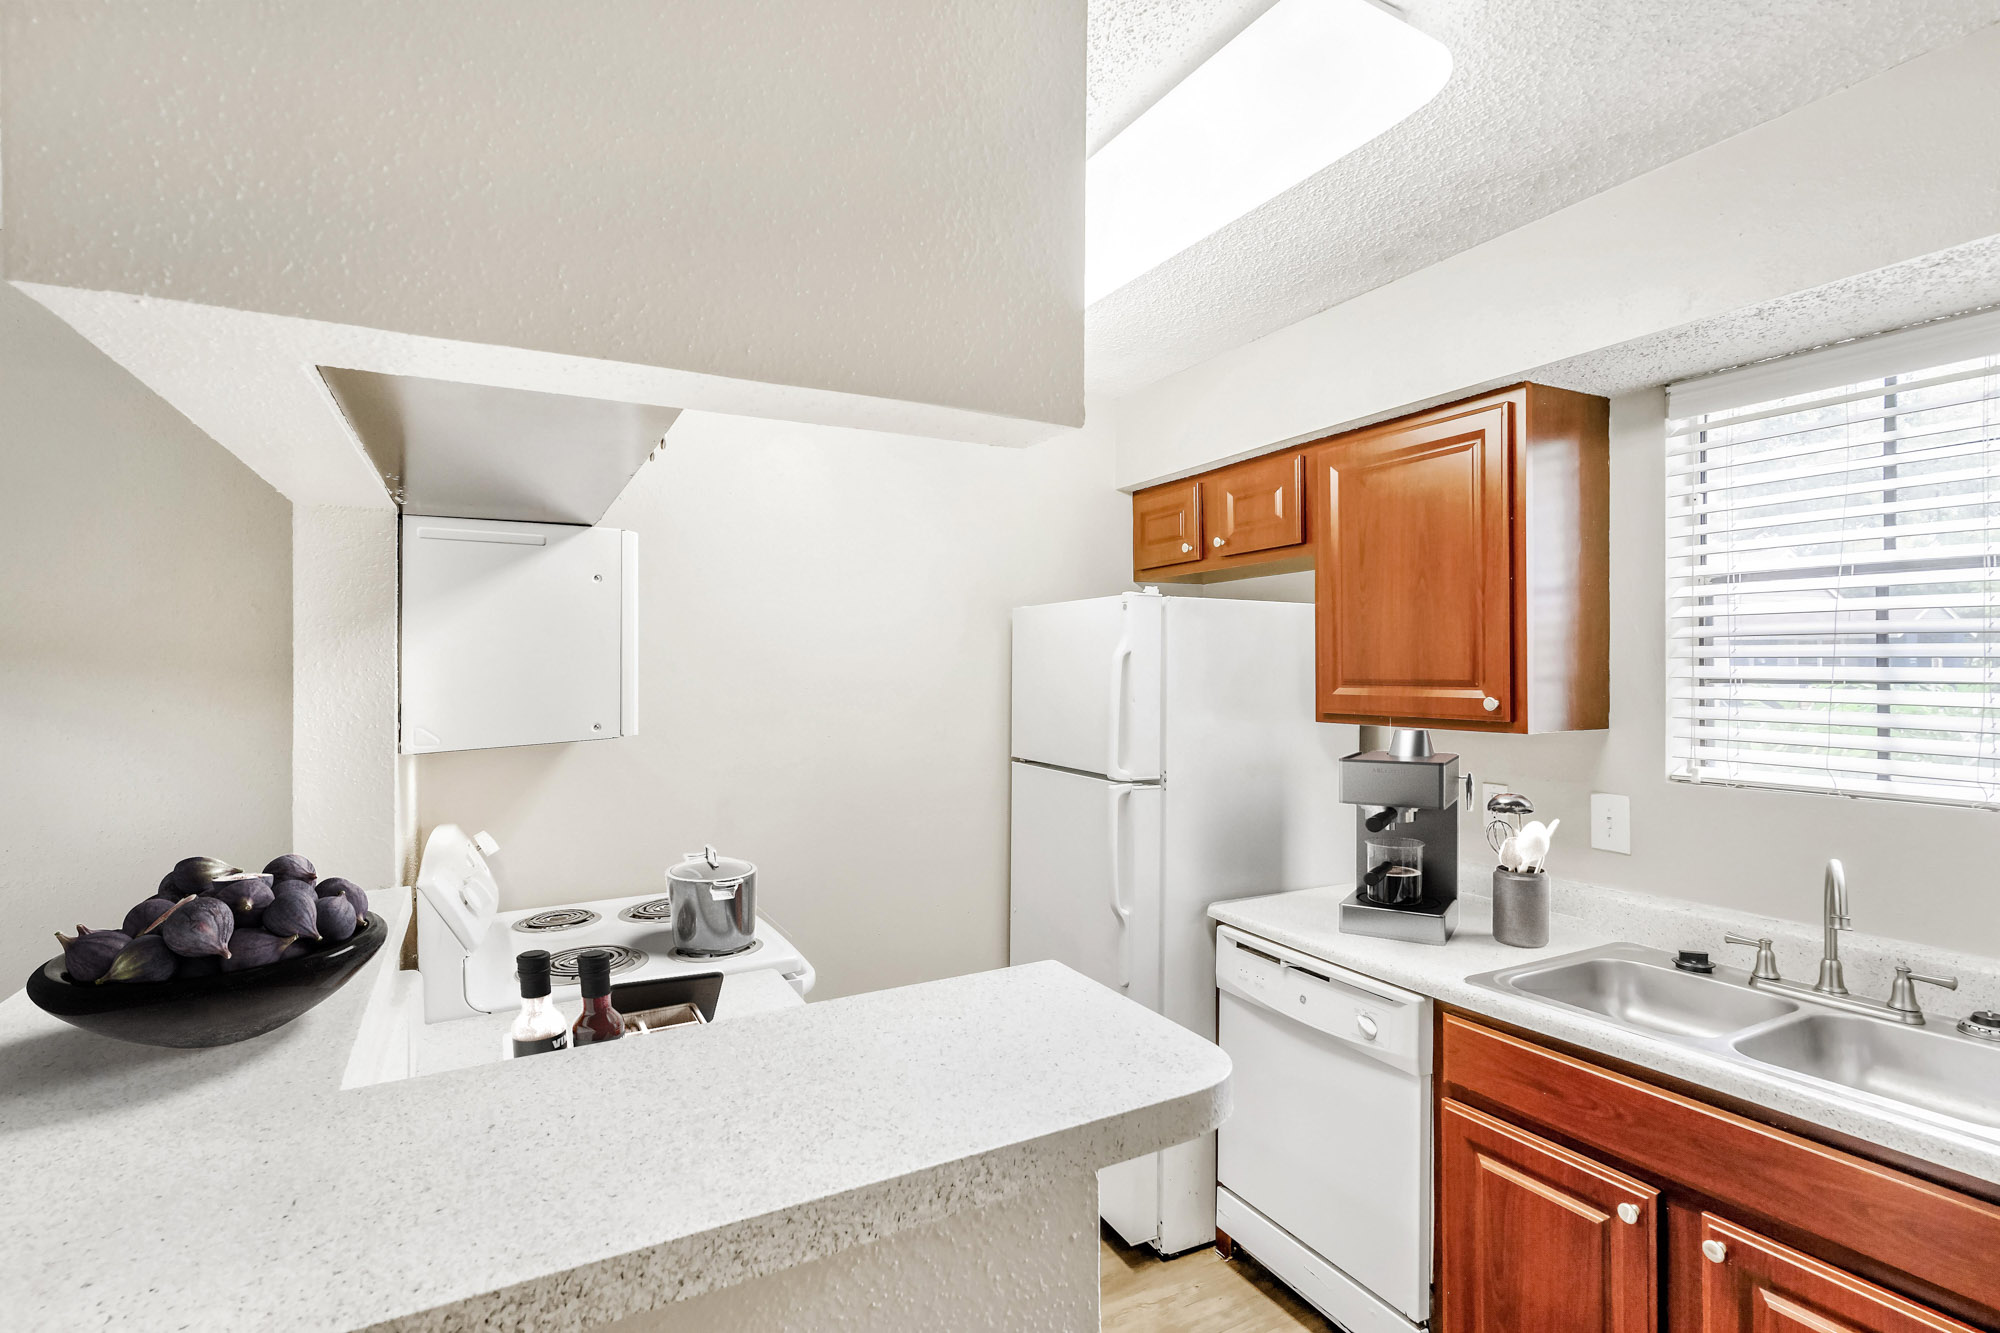 The kitchen in an apartment in St. James Crossing in Tampa, Florida.